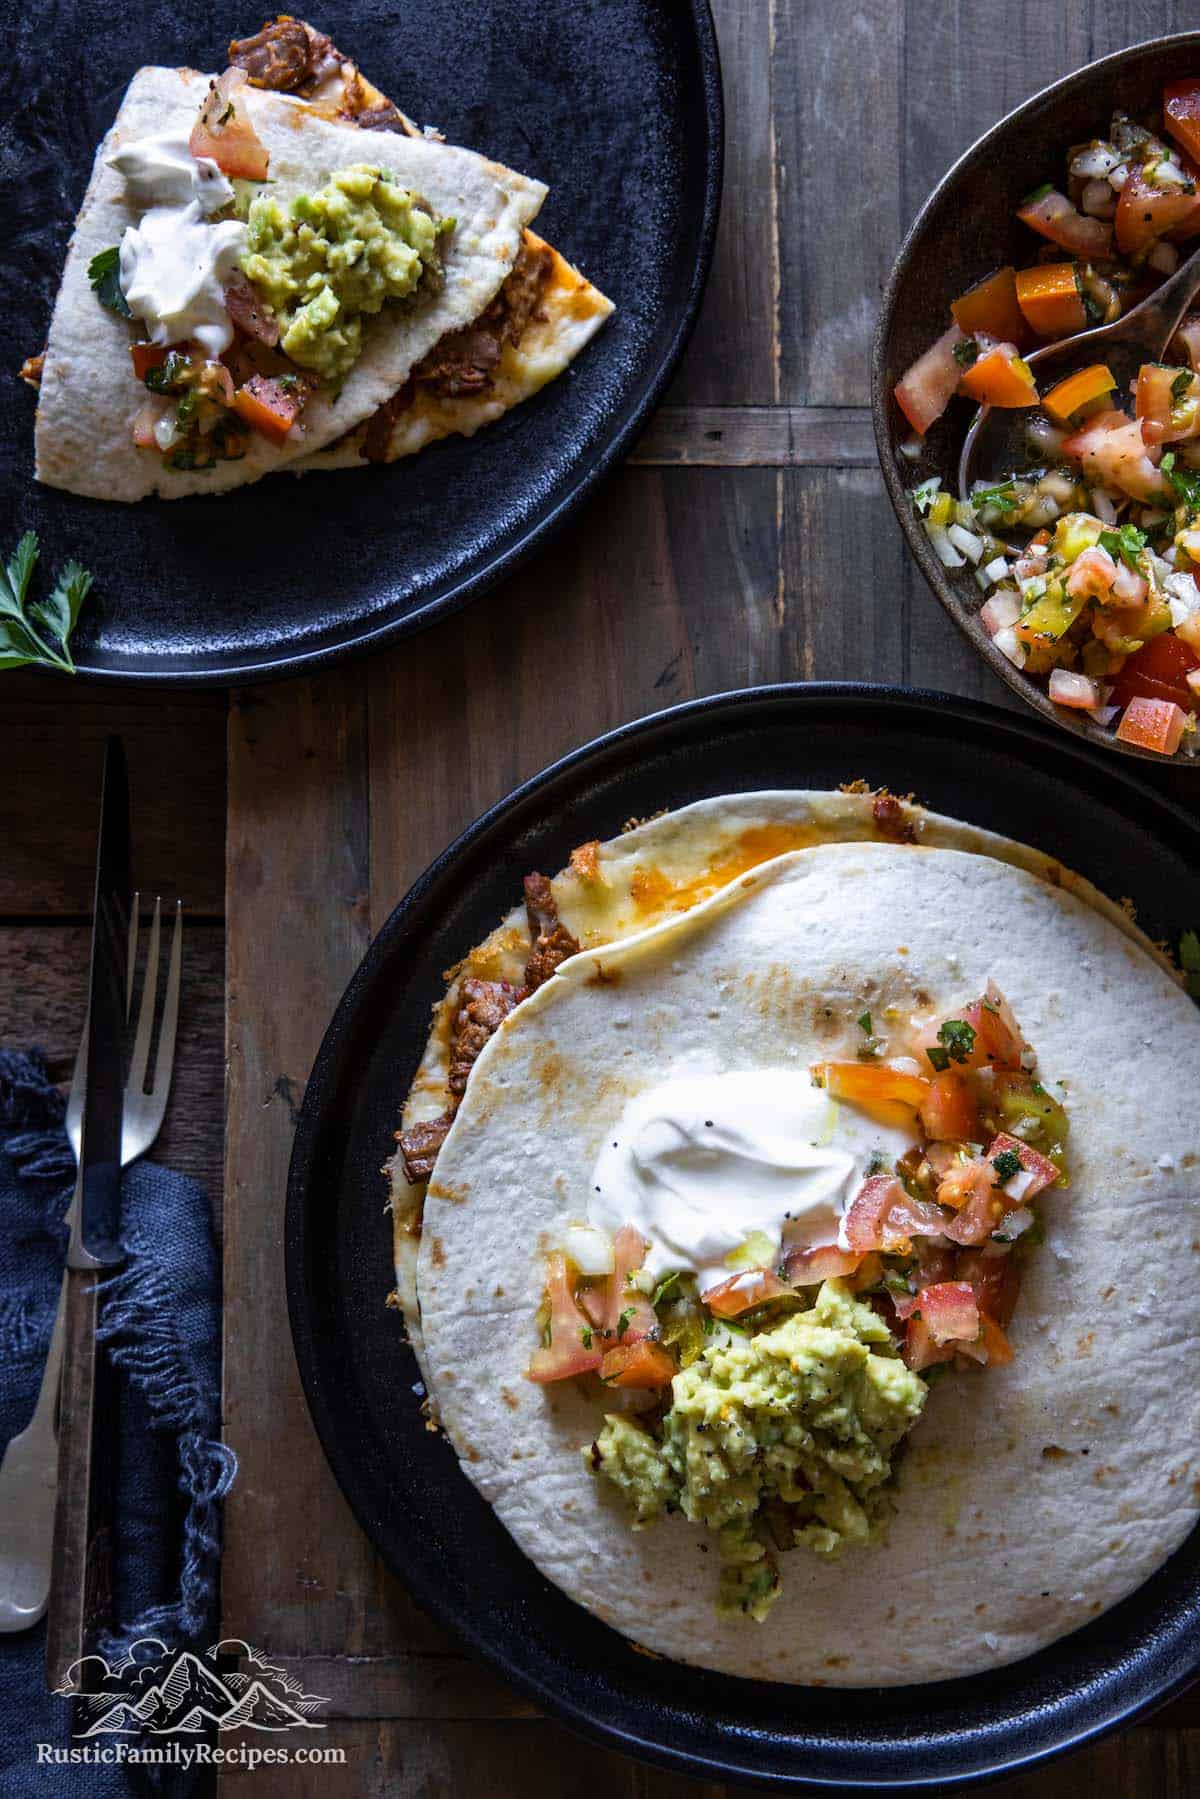 Uncut quesadilla on a plate, next to a bowl of salsa and a plate with quesadilla wedges